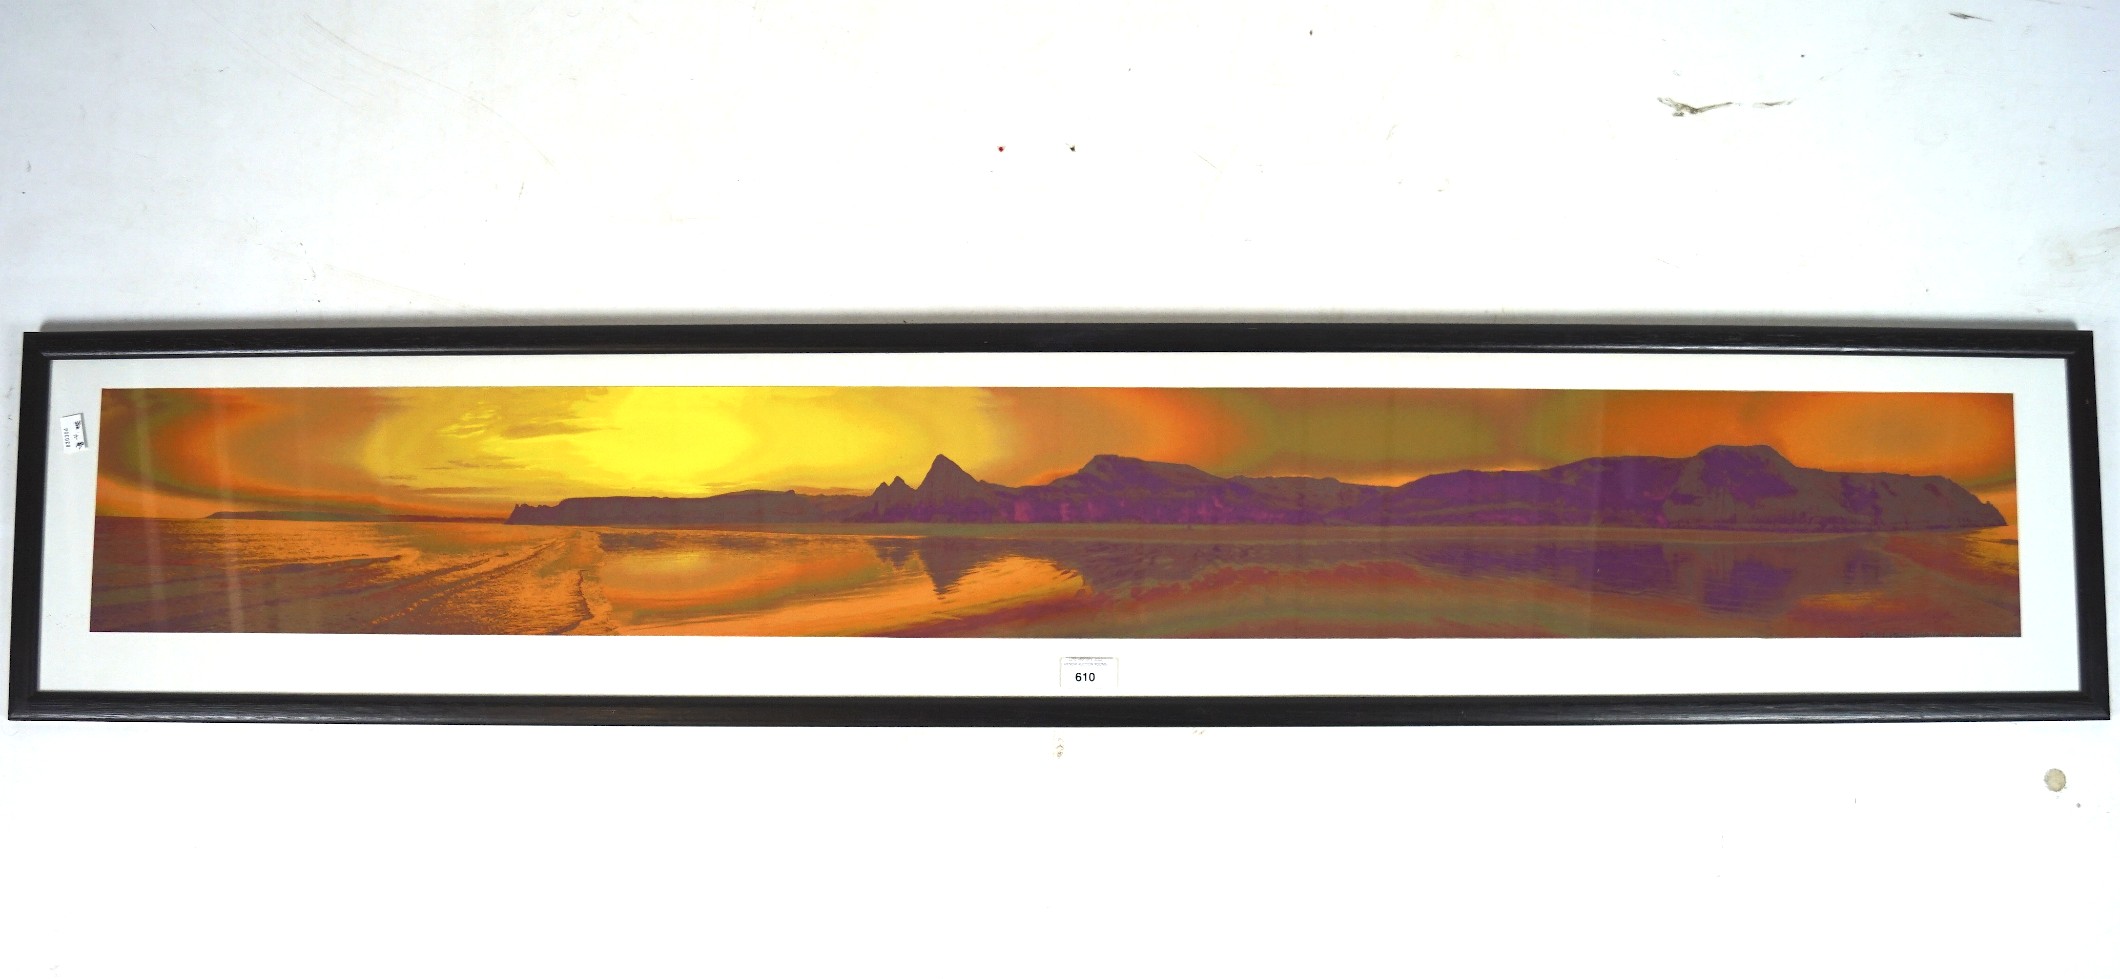 A framed photograph of landscape, 'Marcus Hill Photographer: Cliffs, The Gower, South Wales.